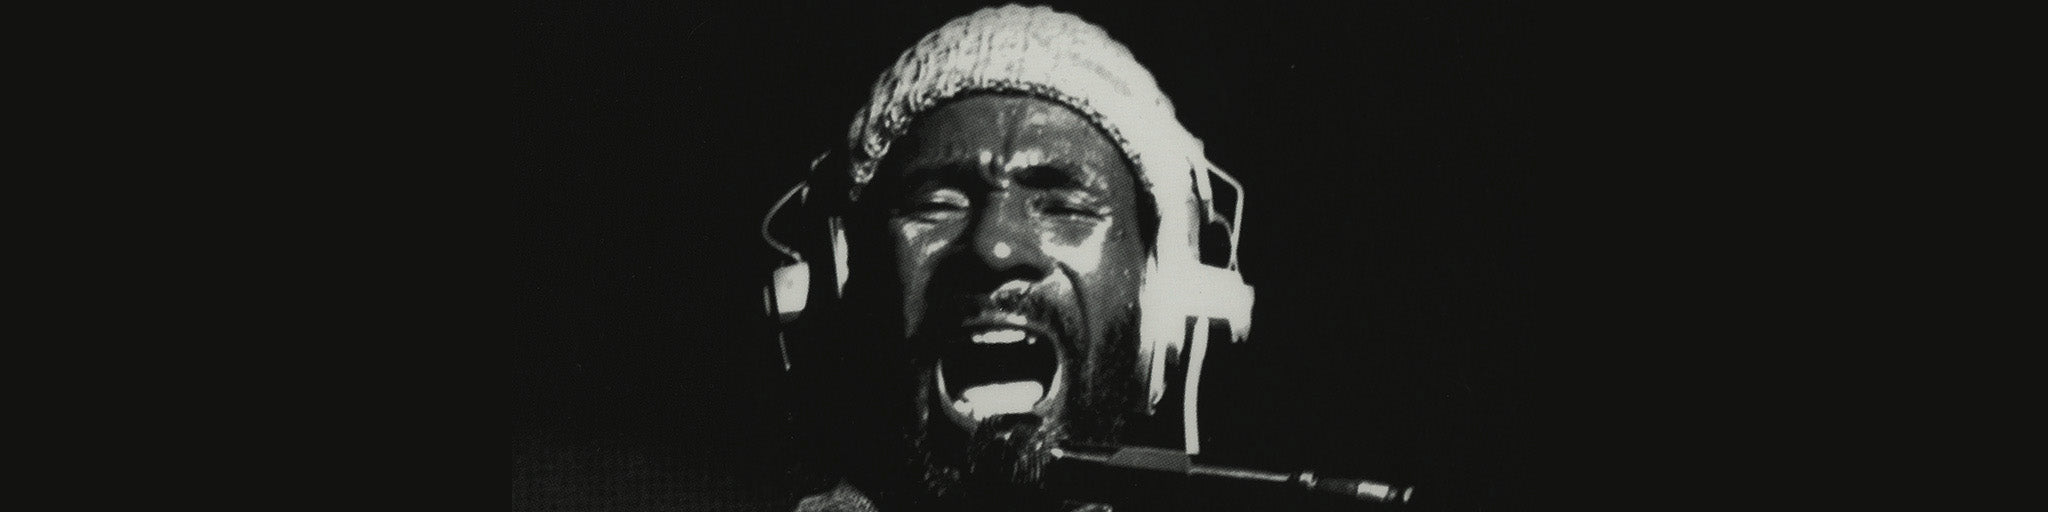 Lee Scratch Perry | Spin Time Records - The Sounds Of Reggae